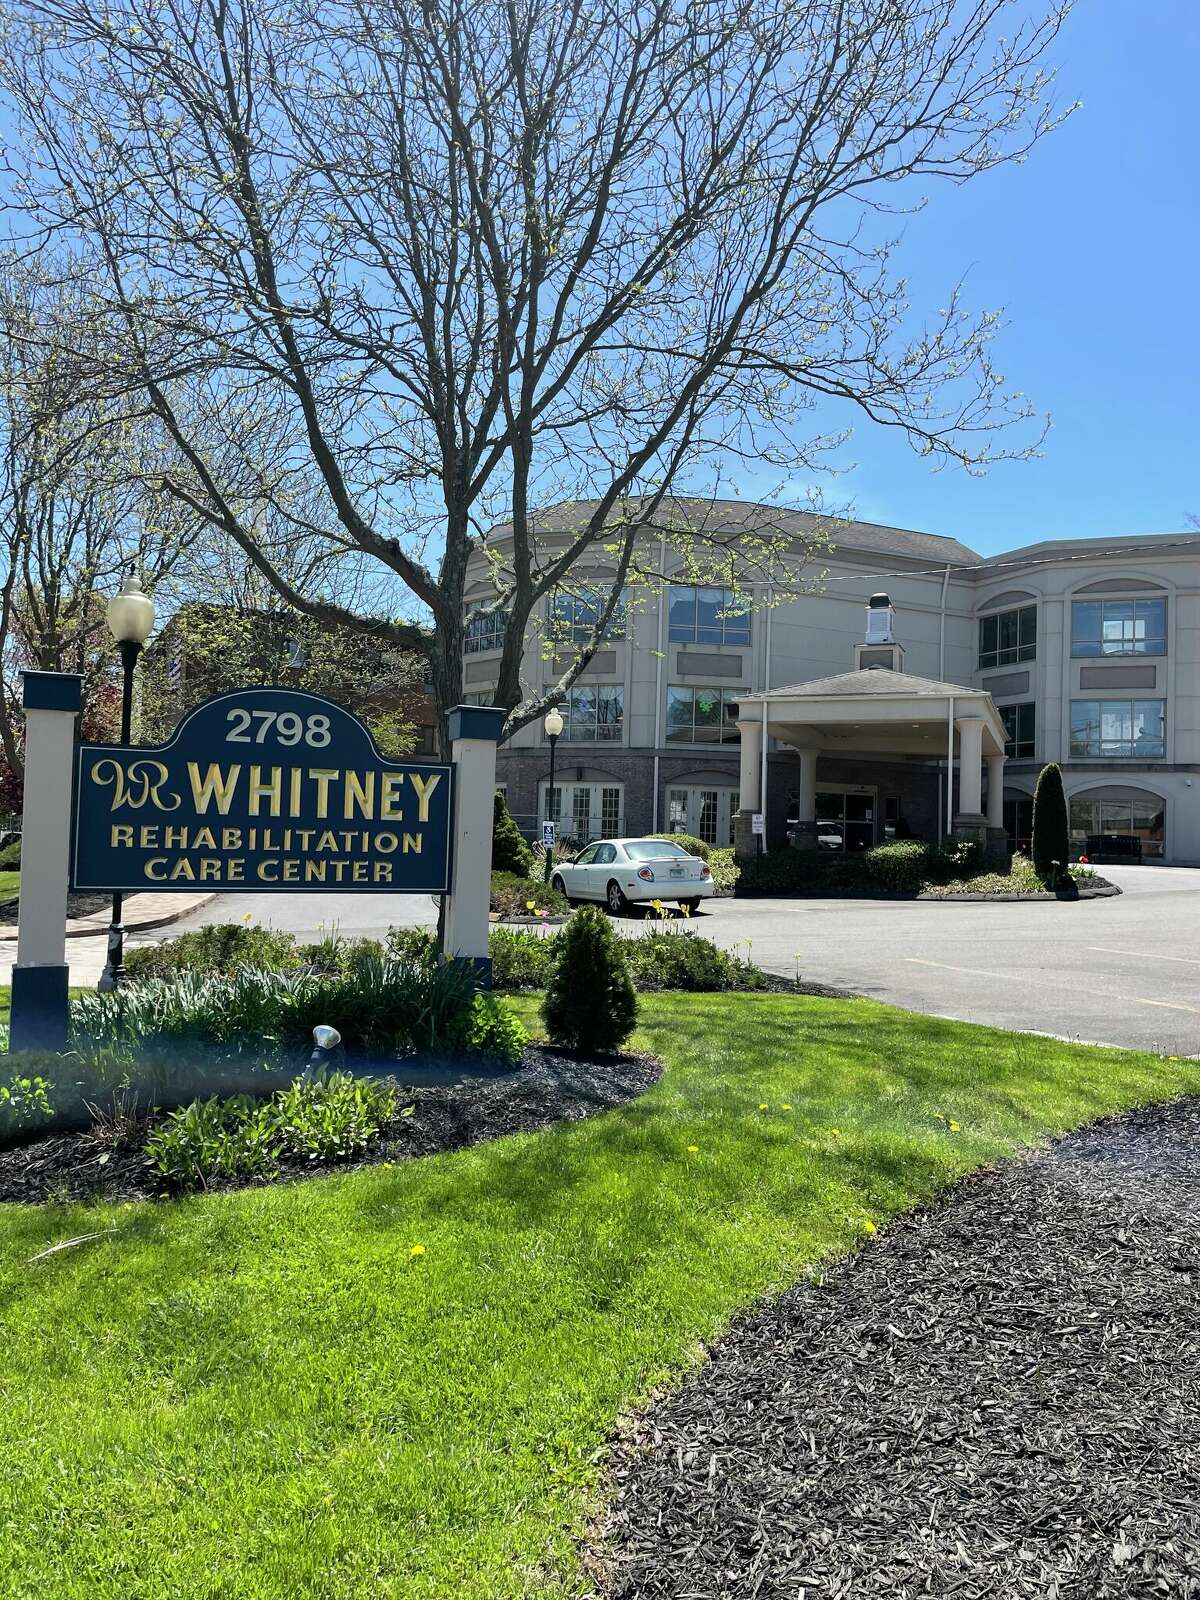 Whitney Rehabilitation Care Center specializes in short-term rehabilitation and offers long-term care options. It is located on Whitney Avenue in Hamden.